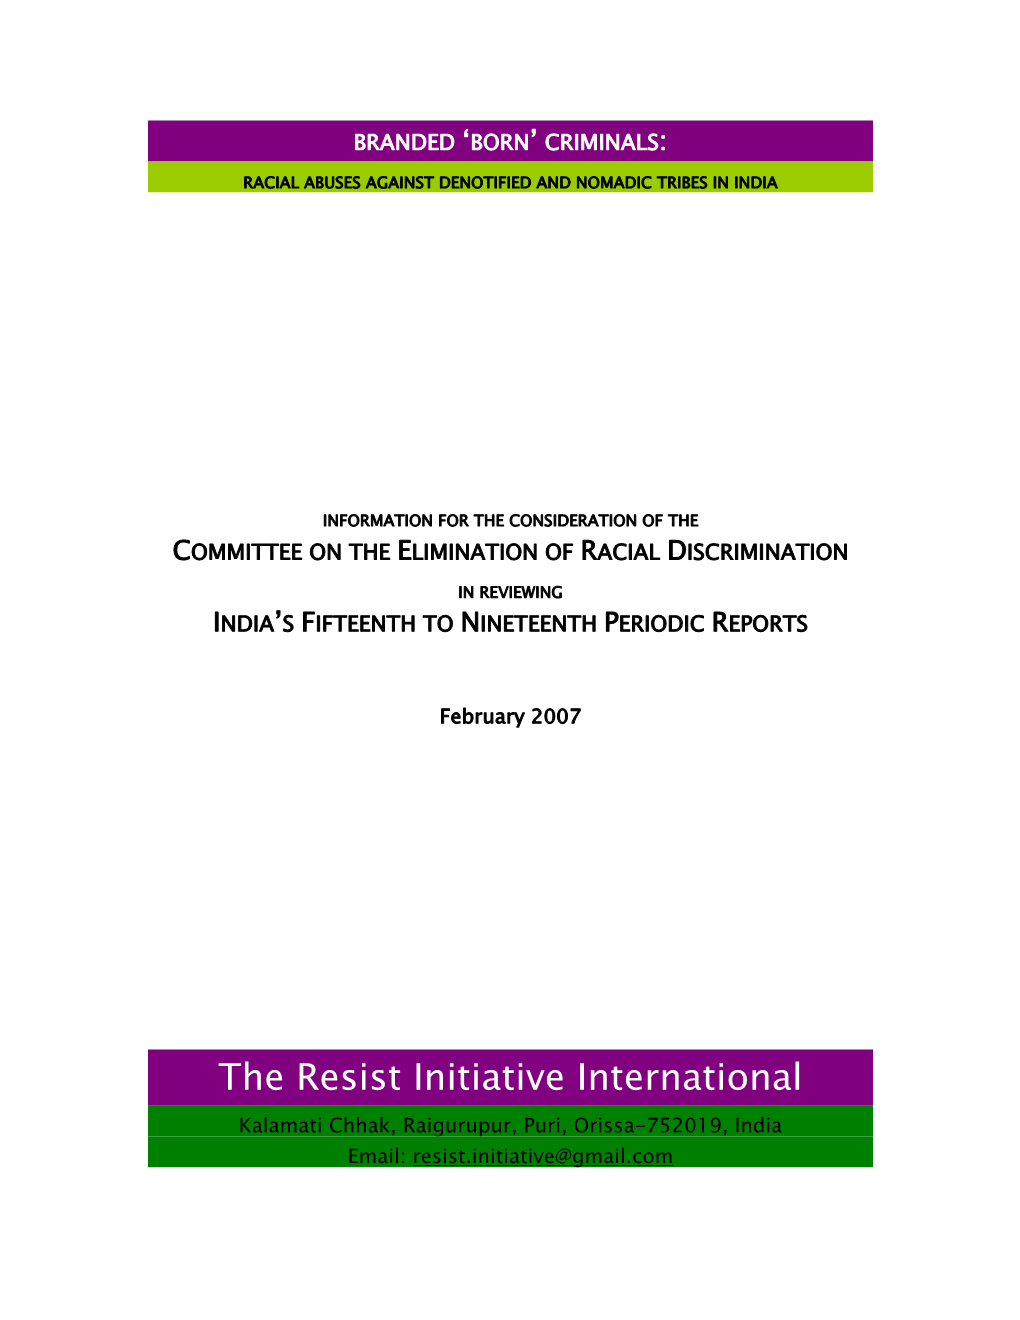 Racial Abuse Against Denotified and Nomadic Tribes in India